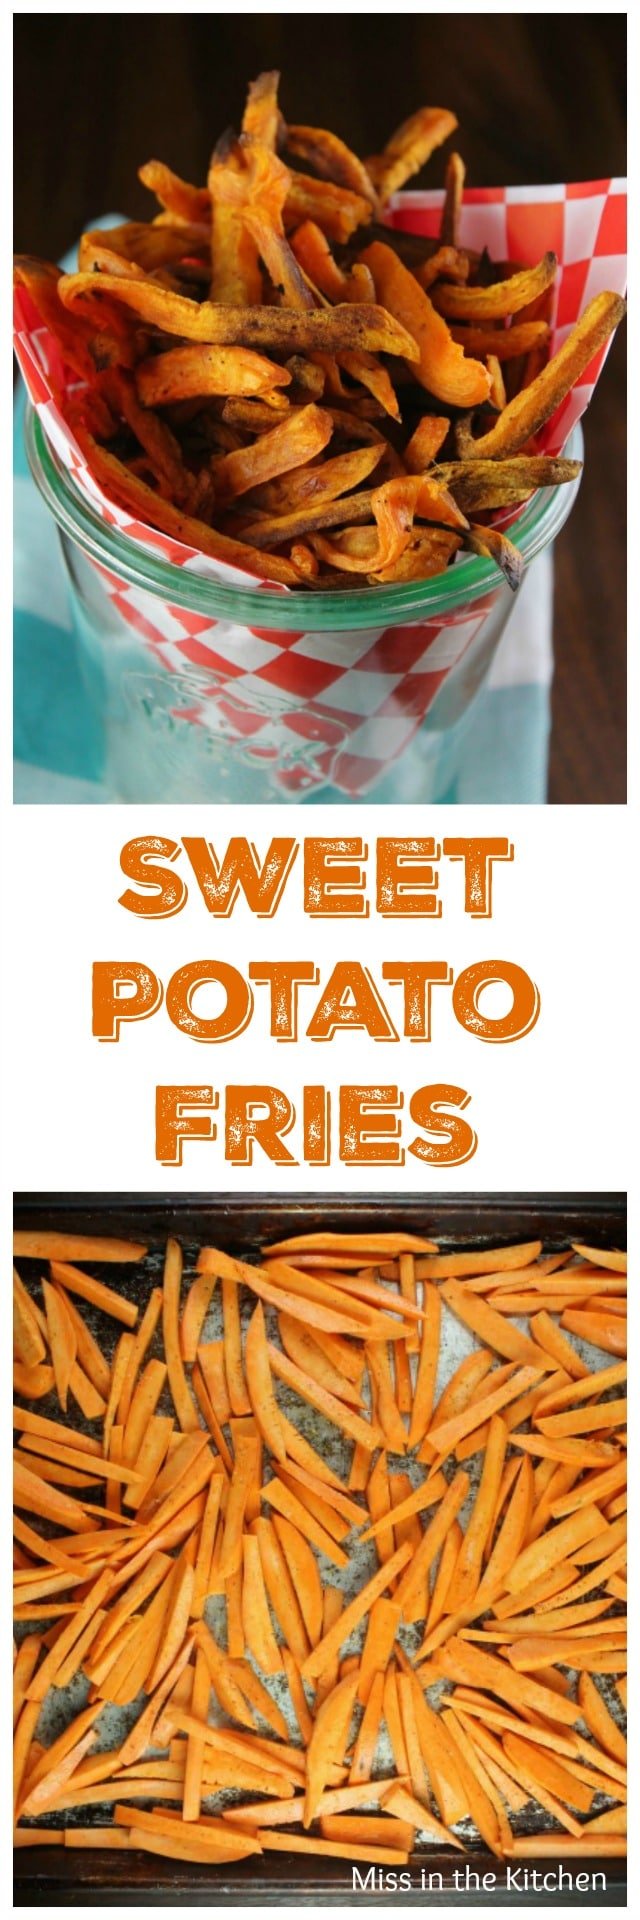 Sweet Potato Fries is the perfect side dish for burgers, steaks and more from the new TCHS Cookbook Found at MissintheKitchen.com #ad